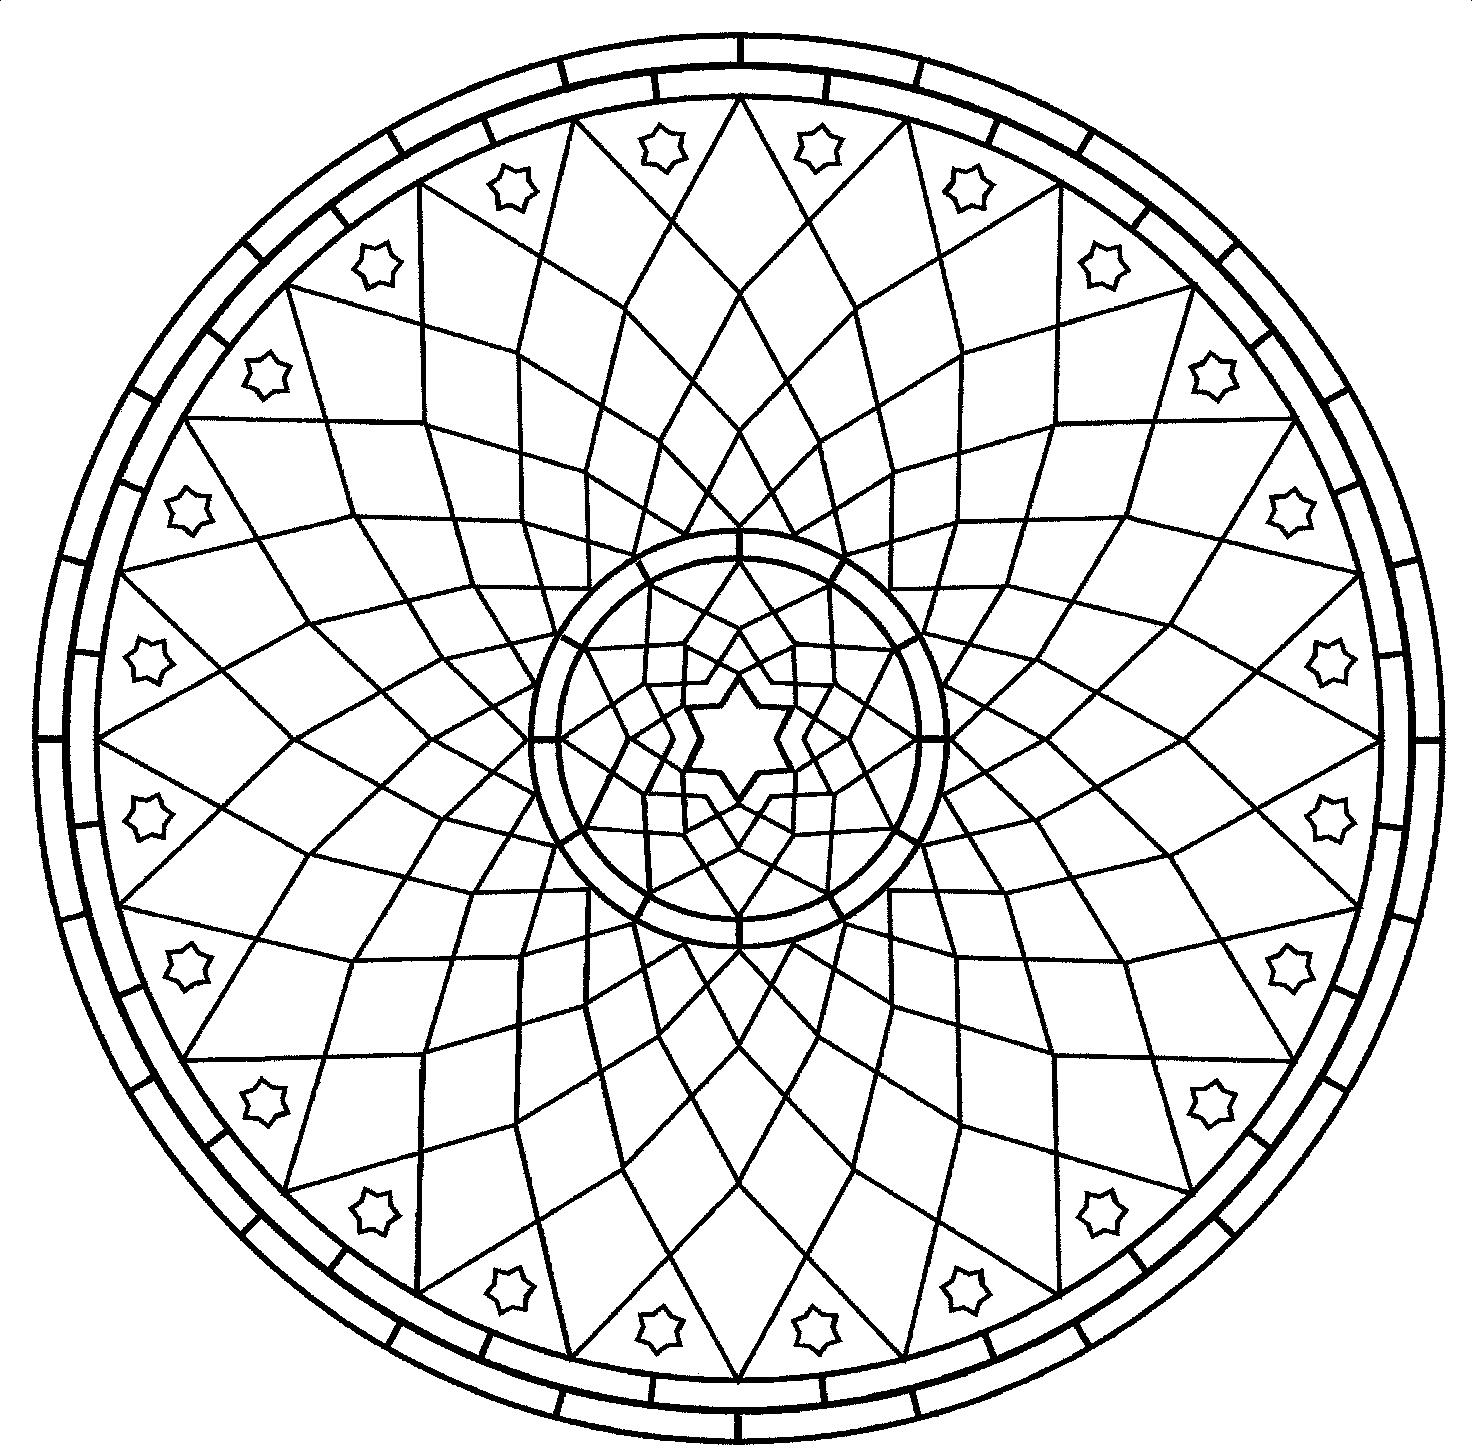  Free Coloring Pages For Adults – letscoloringpages.com – Cool circle